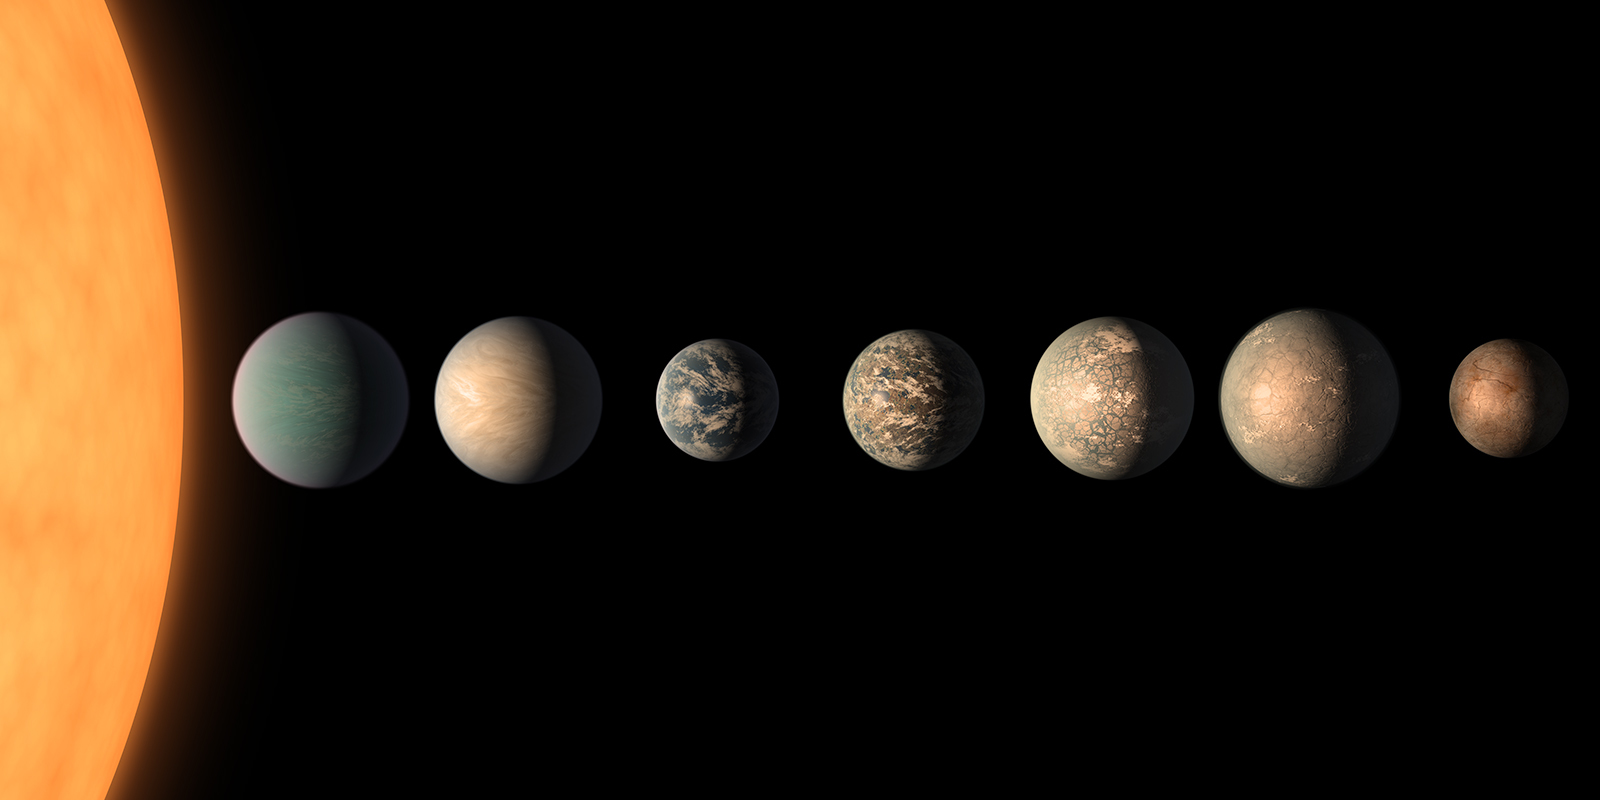 TRAPPIST-1 System: Seven Earth-Sized Planets and Potential Habitability